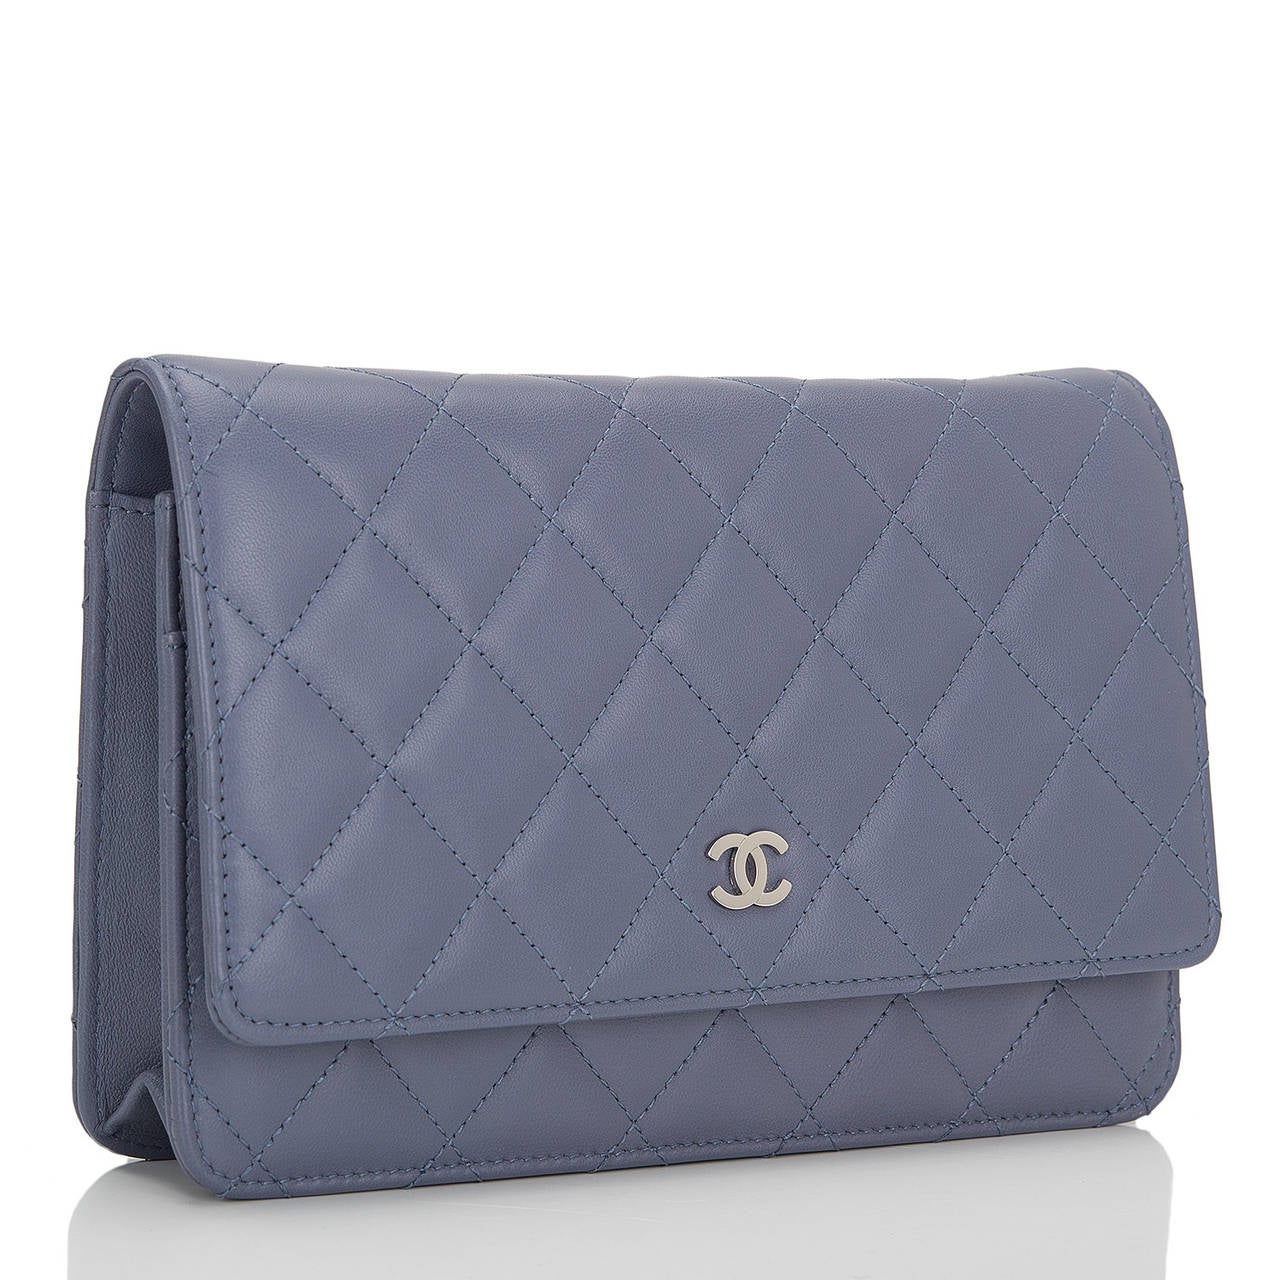 This timeless WOC in a rare lavender color lambskin leather features signature Chanel quilting, front flap with CC charm and hidden snap closure, expandable sides and bottom, half moon rear pocket and interwoven silver tone chain and leather